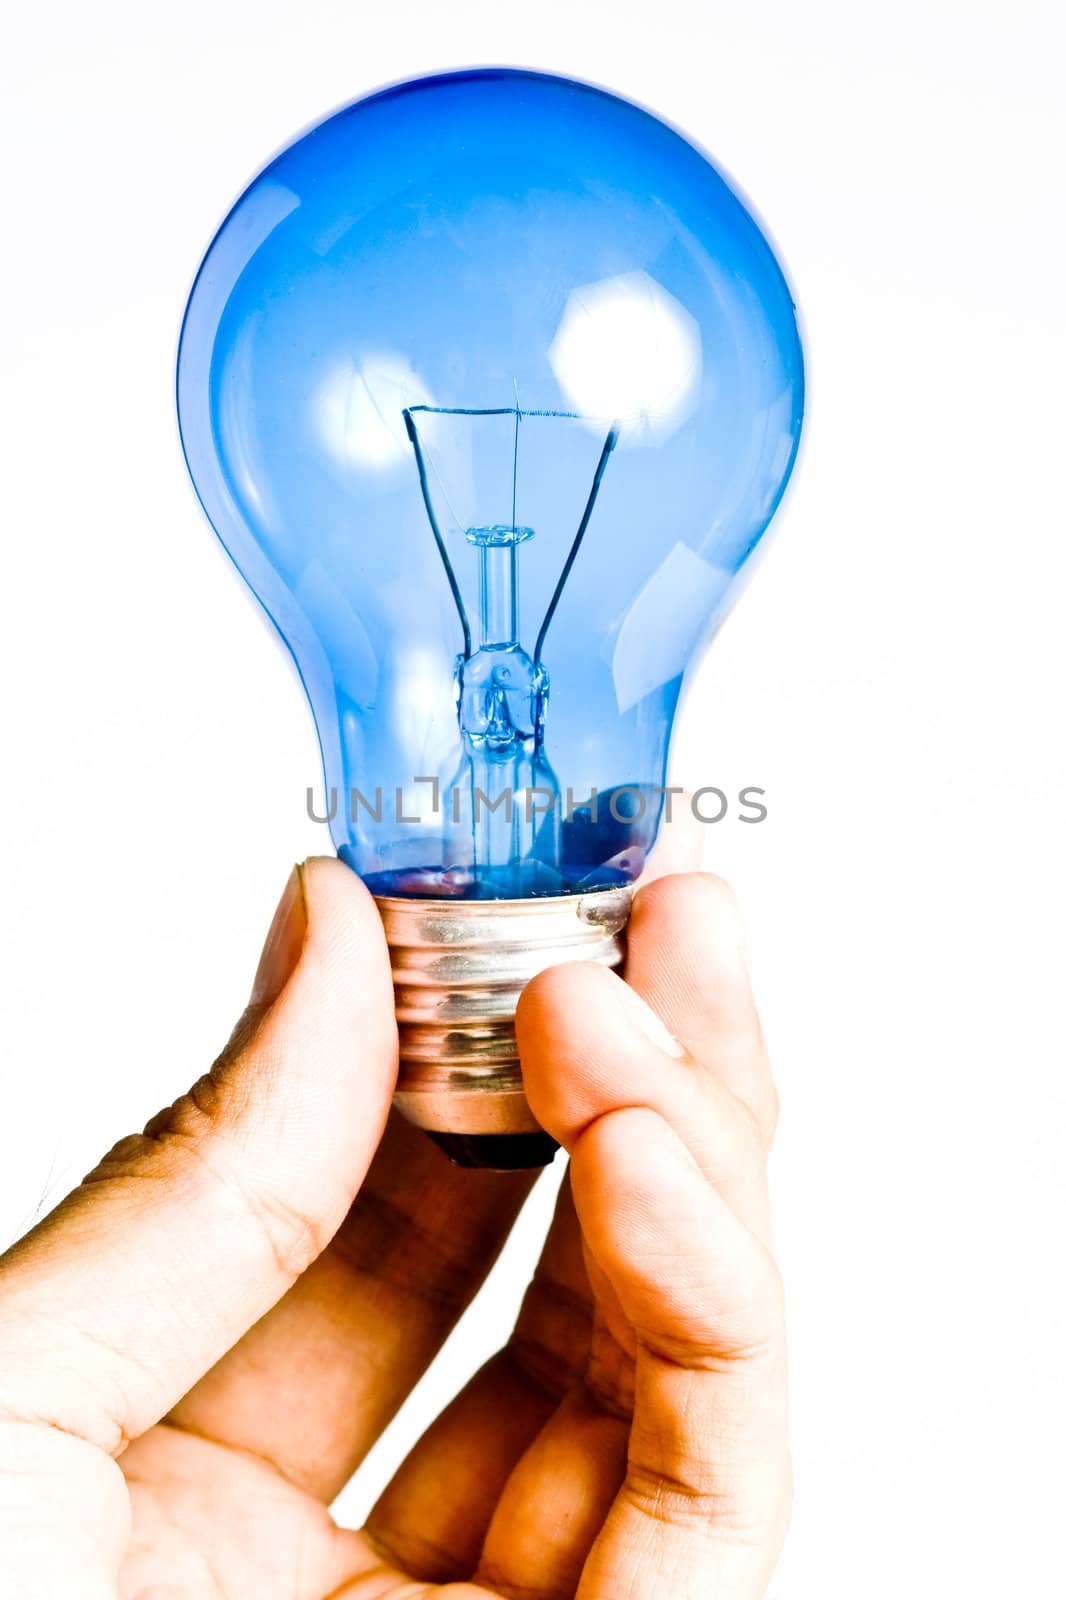 Blue light bulb in the hand by pixbox77